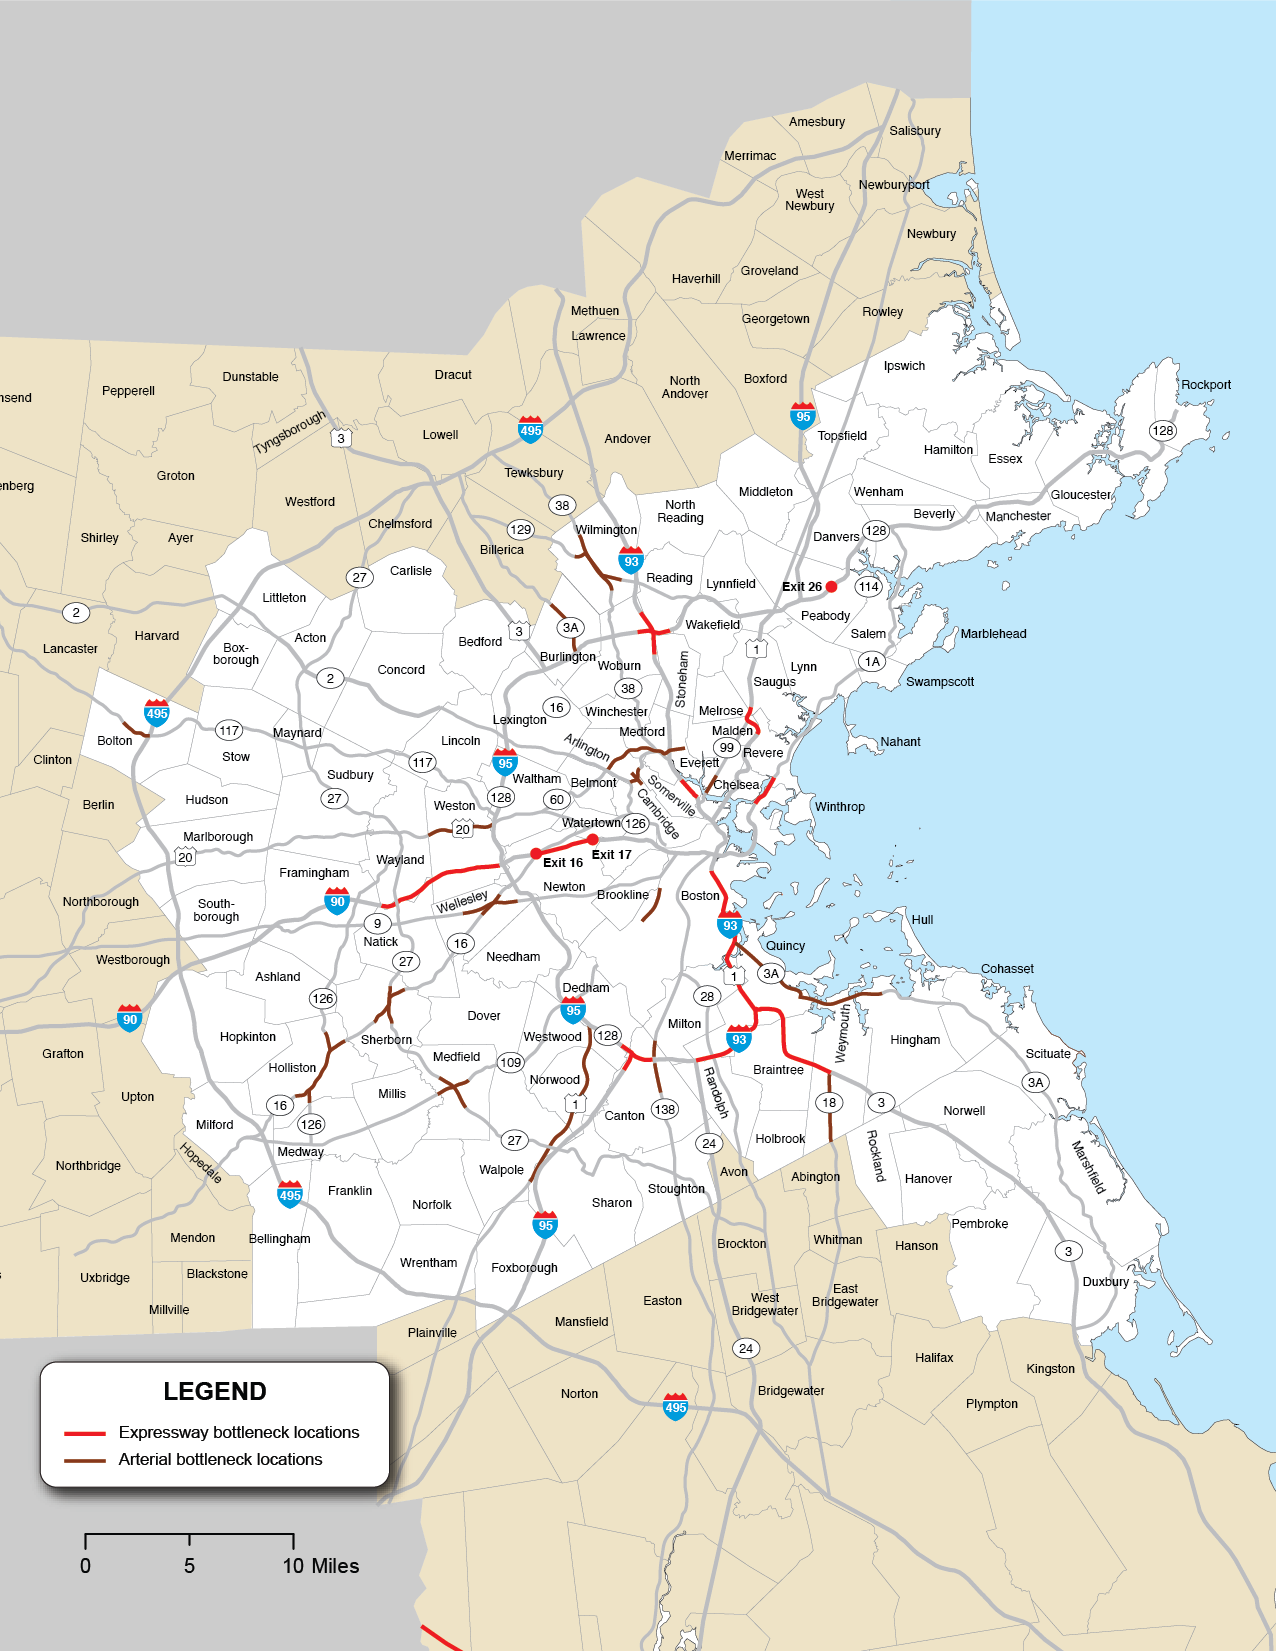 Figure 6-6 is a map of the Boston region displaying Expressways and Arterial Roadways. Figure 6-6 also shows Expressway and Arterial bottleneck locations.